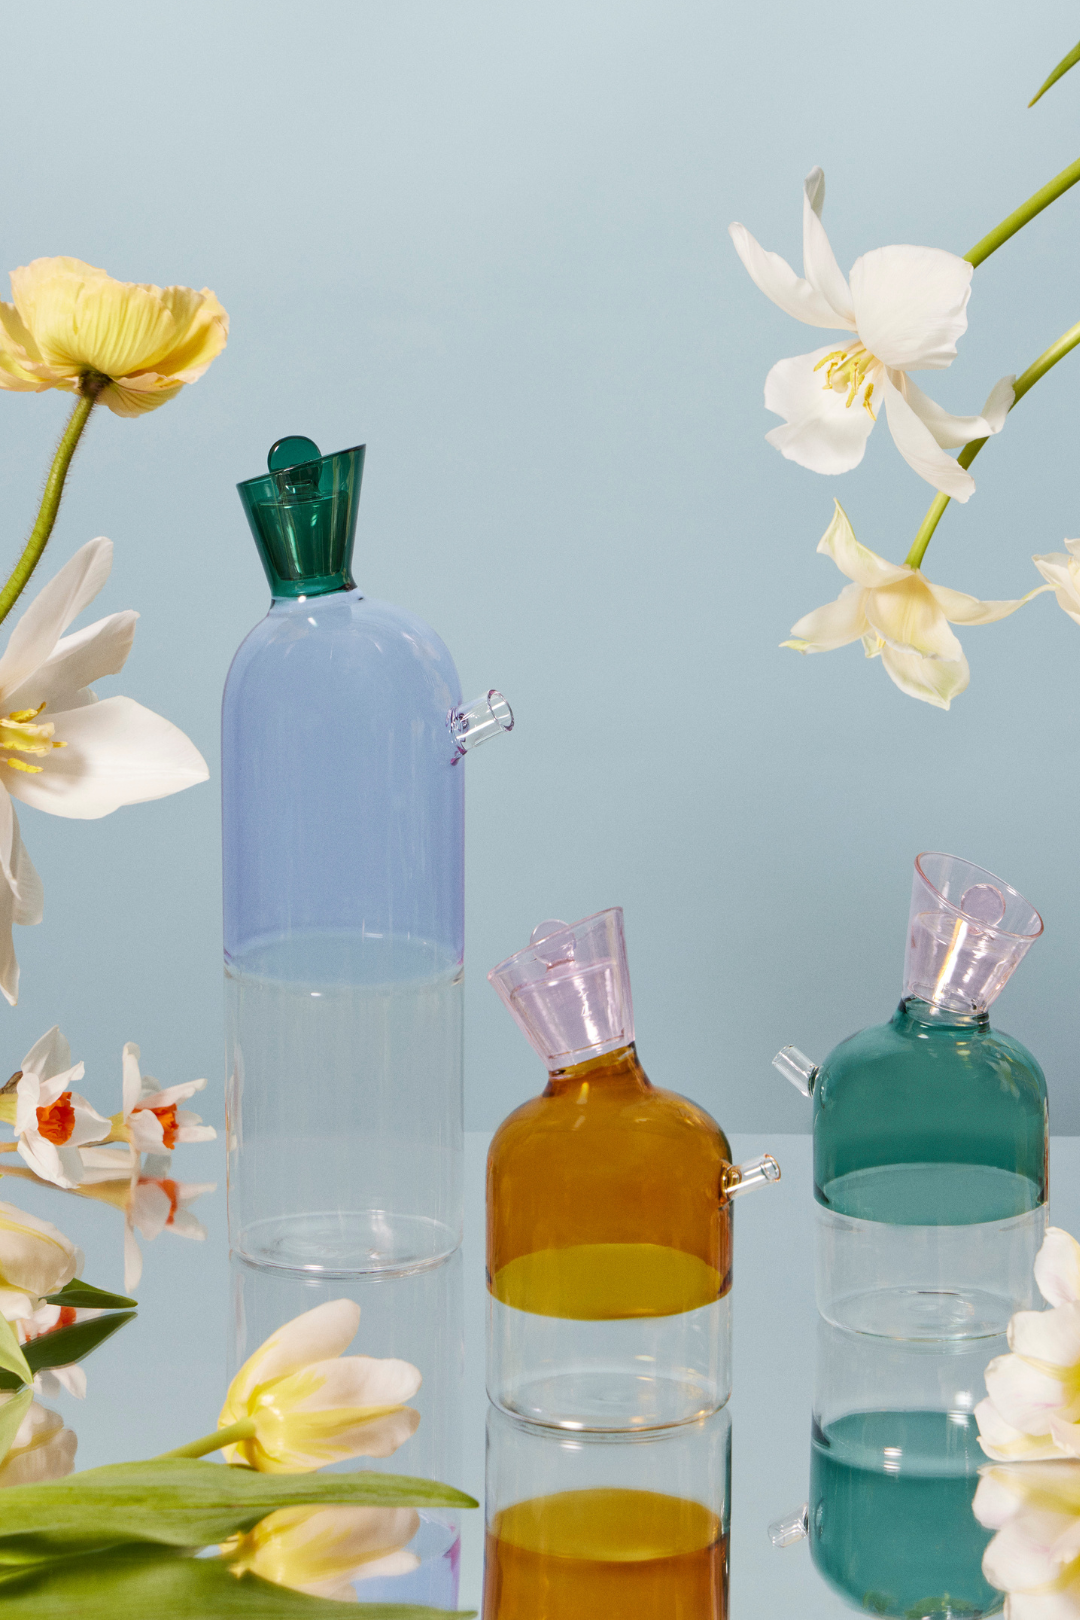 Lilac Carafe and two oil and vinegar bottles in teal and amber borosilicate glass on a mirrored table surrounded by tulips and daffodils. Contemporary, minimalist allure animates the modernist design of these colored glass decanters